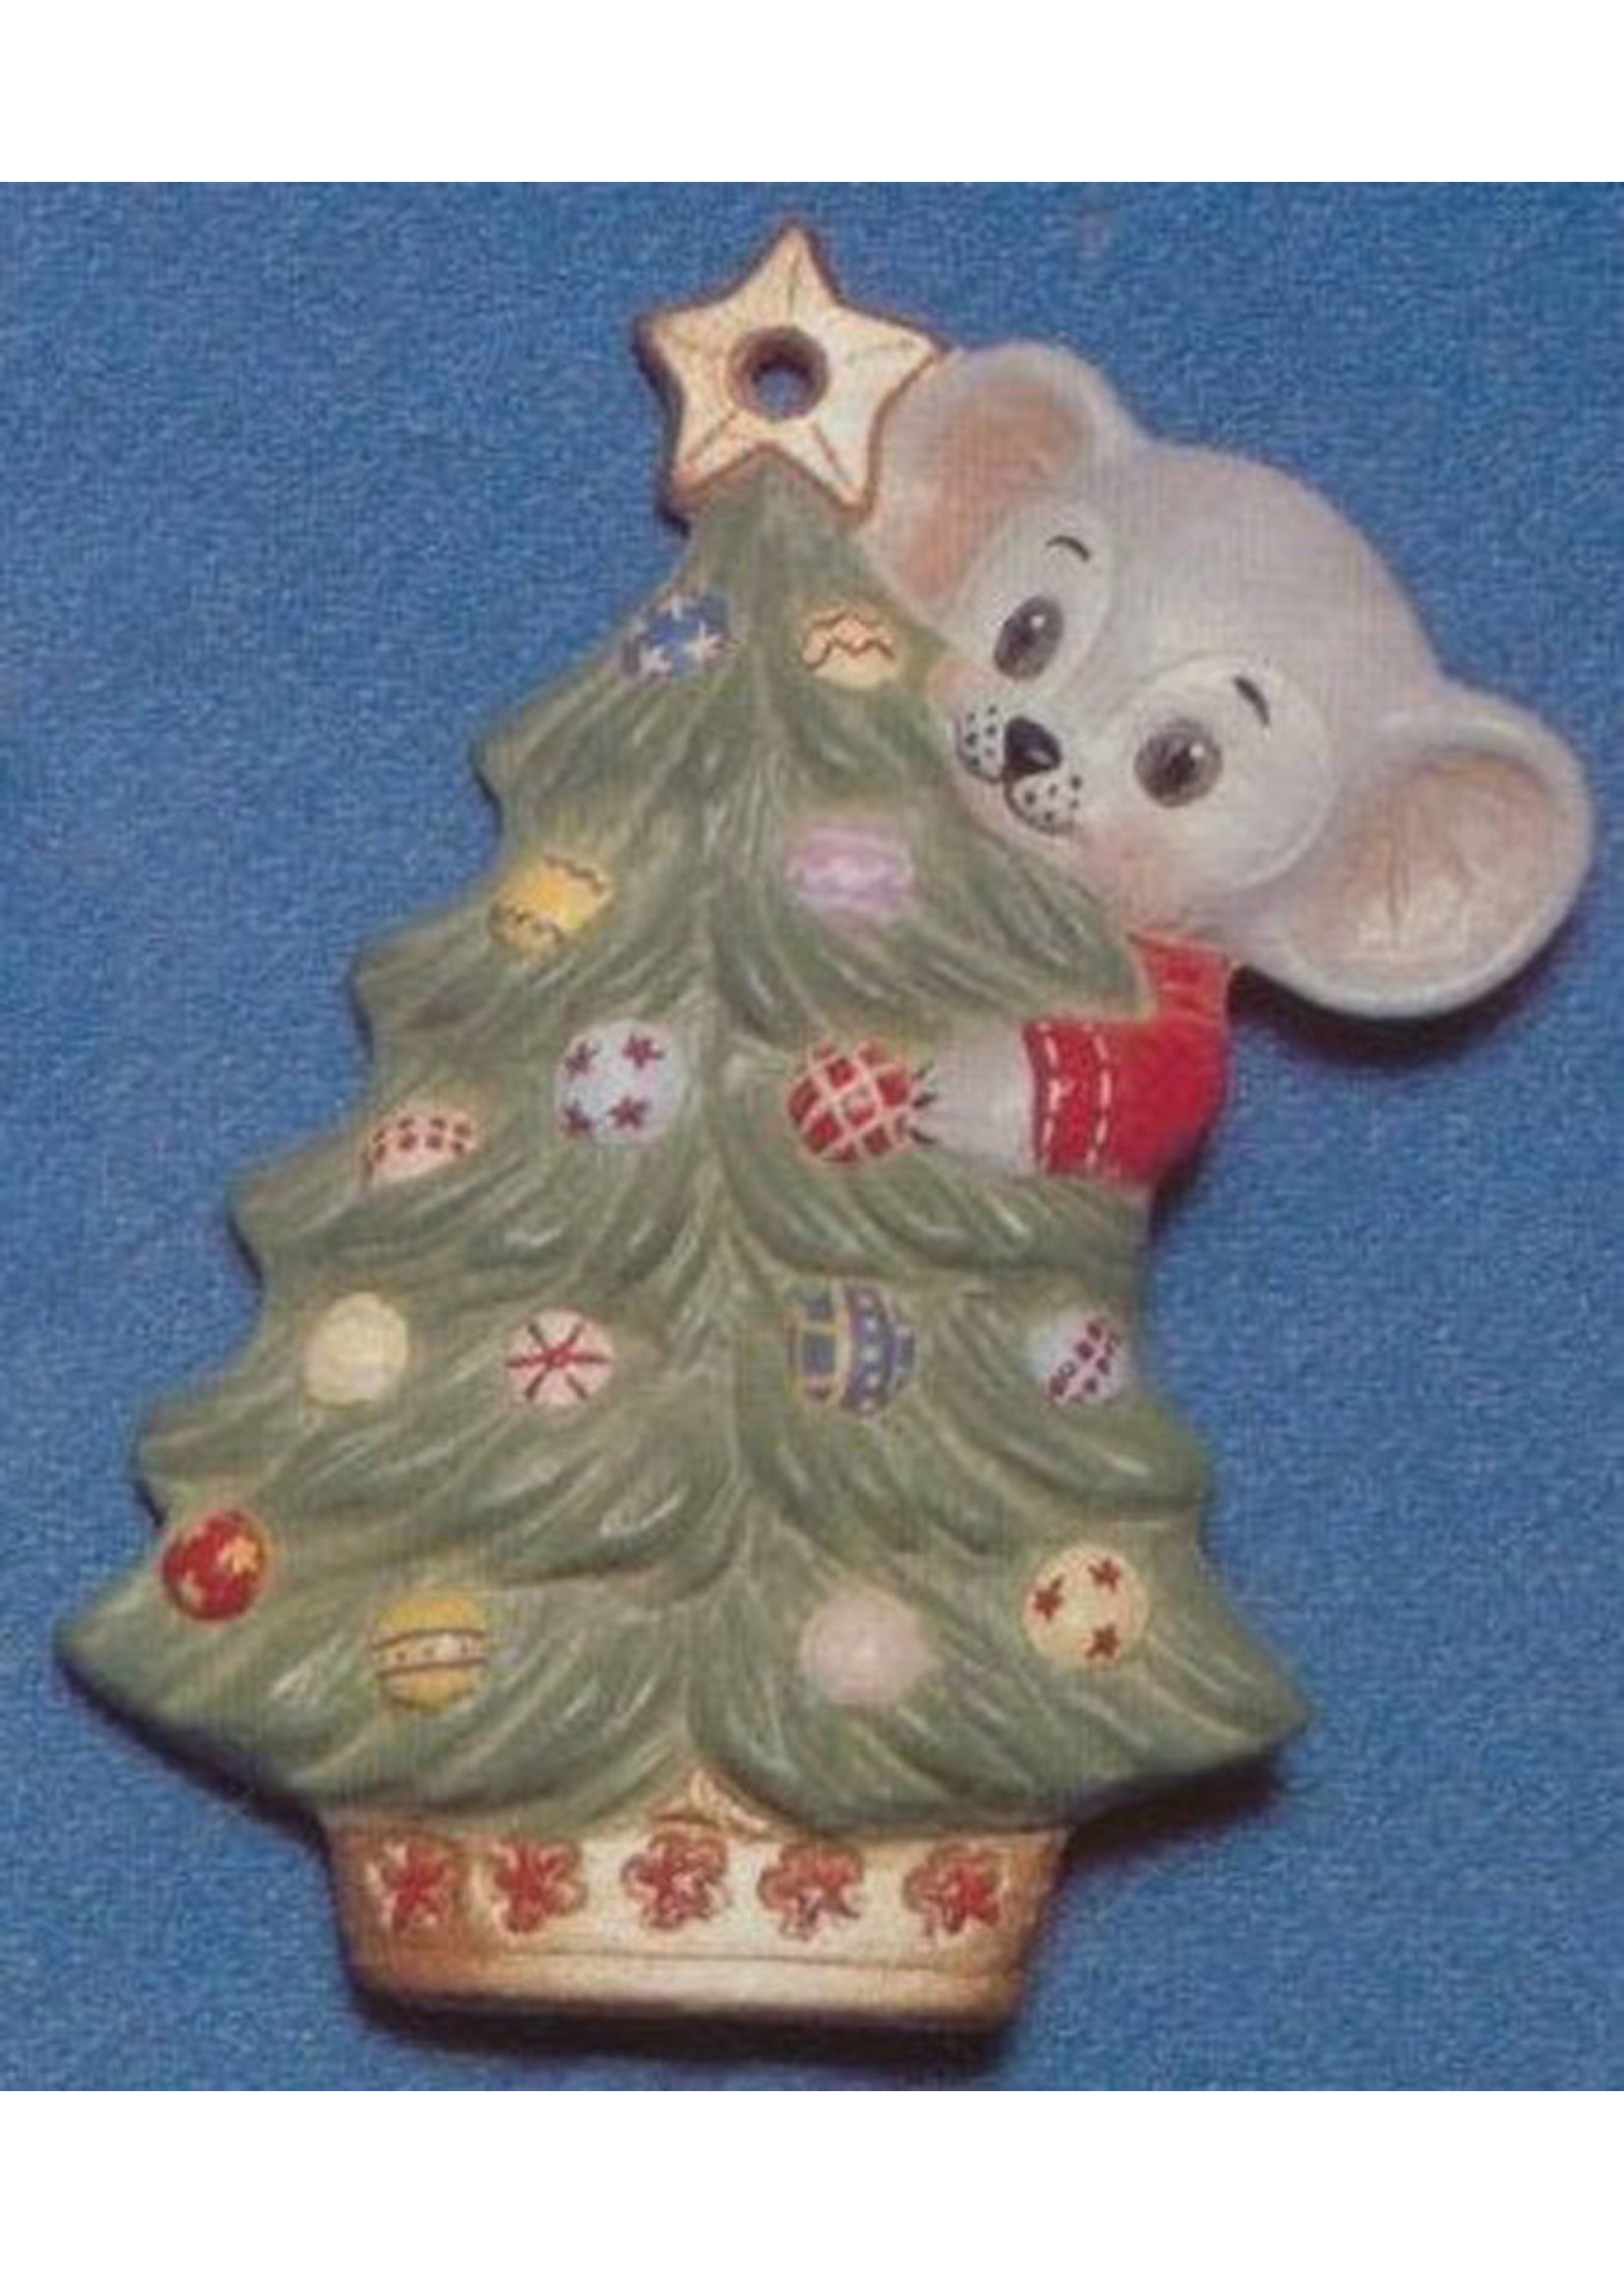  Holiday Mice Ceramic Bisque Christmas Tree Ornaments 5